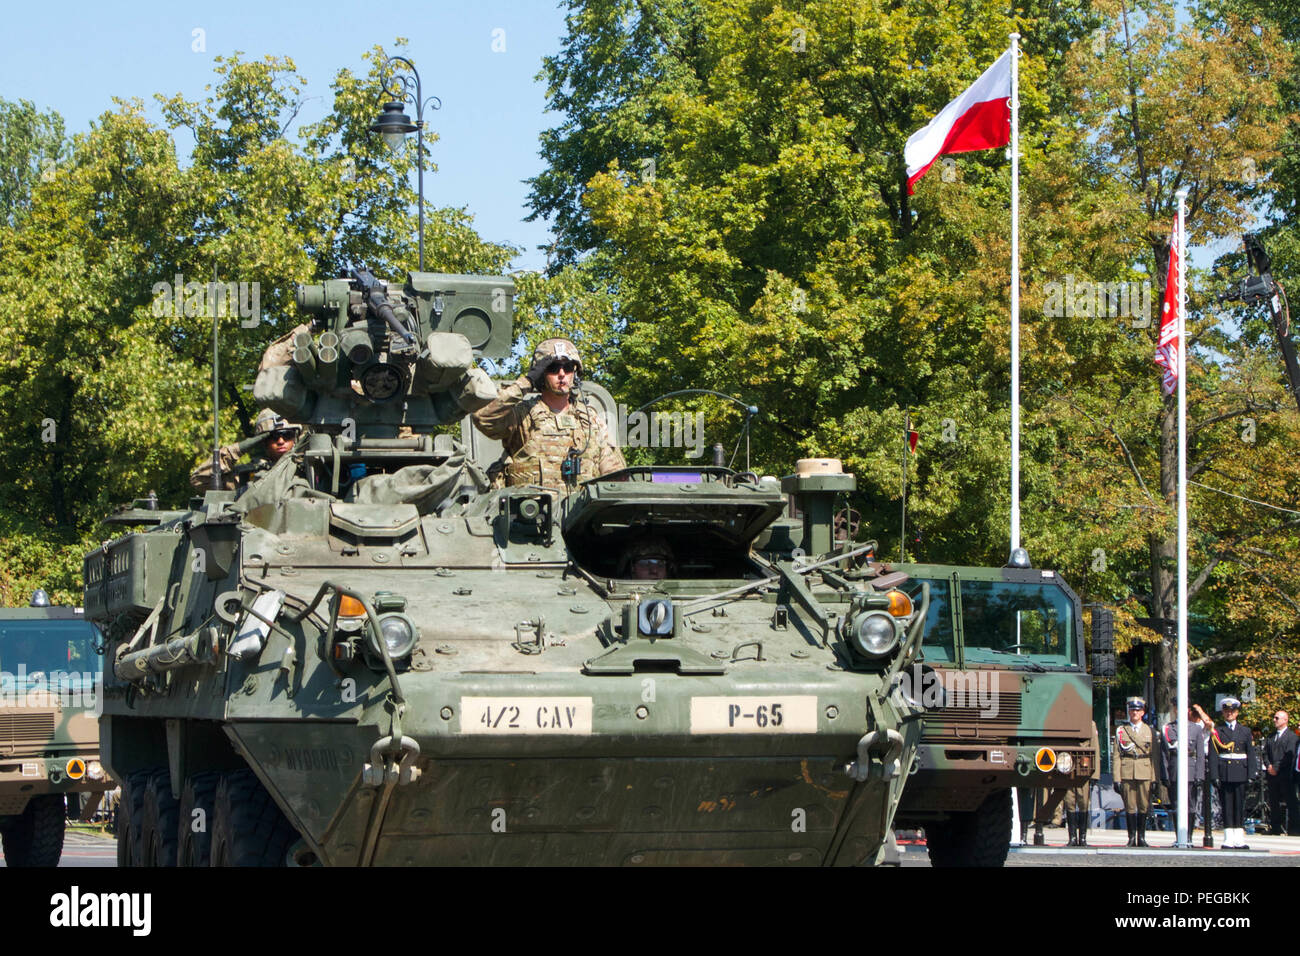 Soldiers with P Troop, 4th Squadron, 2nd Cavalry Regiment operate Stryker vehicles during a parade Aug. 15, 2015, in Warsaw, Poland. Armed Forces Day is a national holiday commemorating the 1920 victory over Soviet Russia at the Battle of Warsaw during the Polish-Soviet War. The U.S. Soldiers are in Poland participating in Operation Atlantic Resolve, an ongoing multinational partnership focused on combined training and security cooperation between NATO allies. Led by the mission command element of the 4th Infantry Division and in conjunction with European partner nations, Atlantic Resolve is i Stock Photo